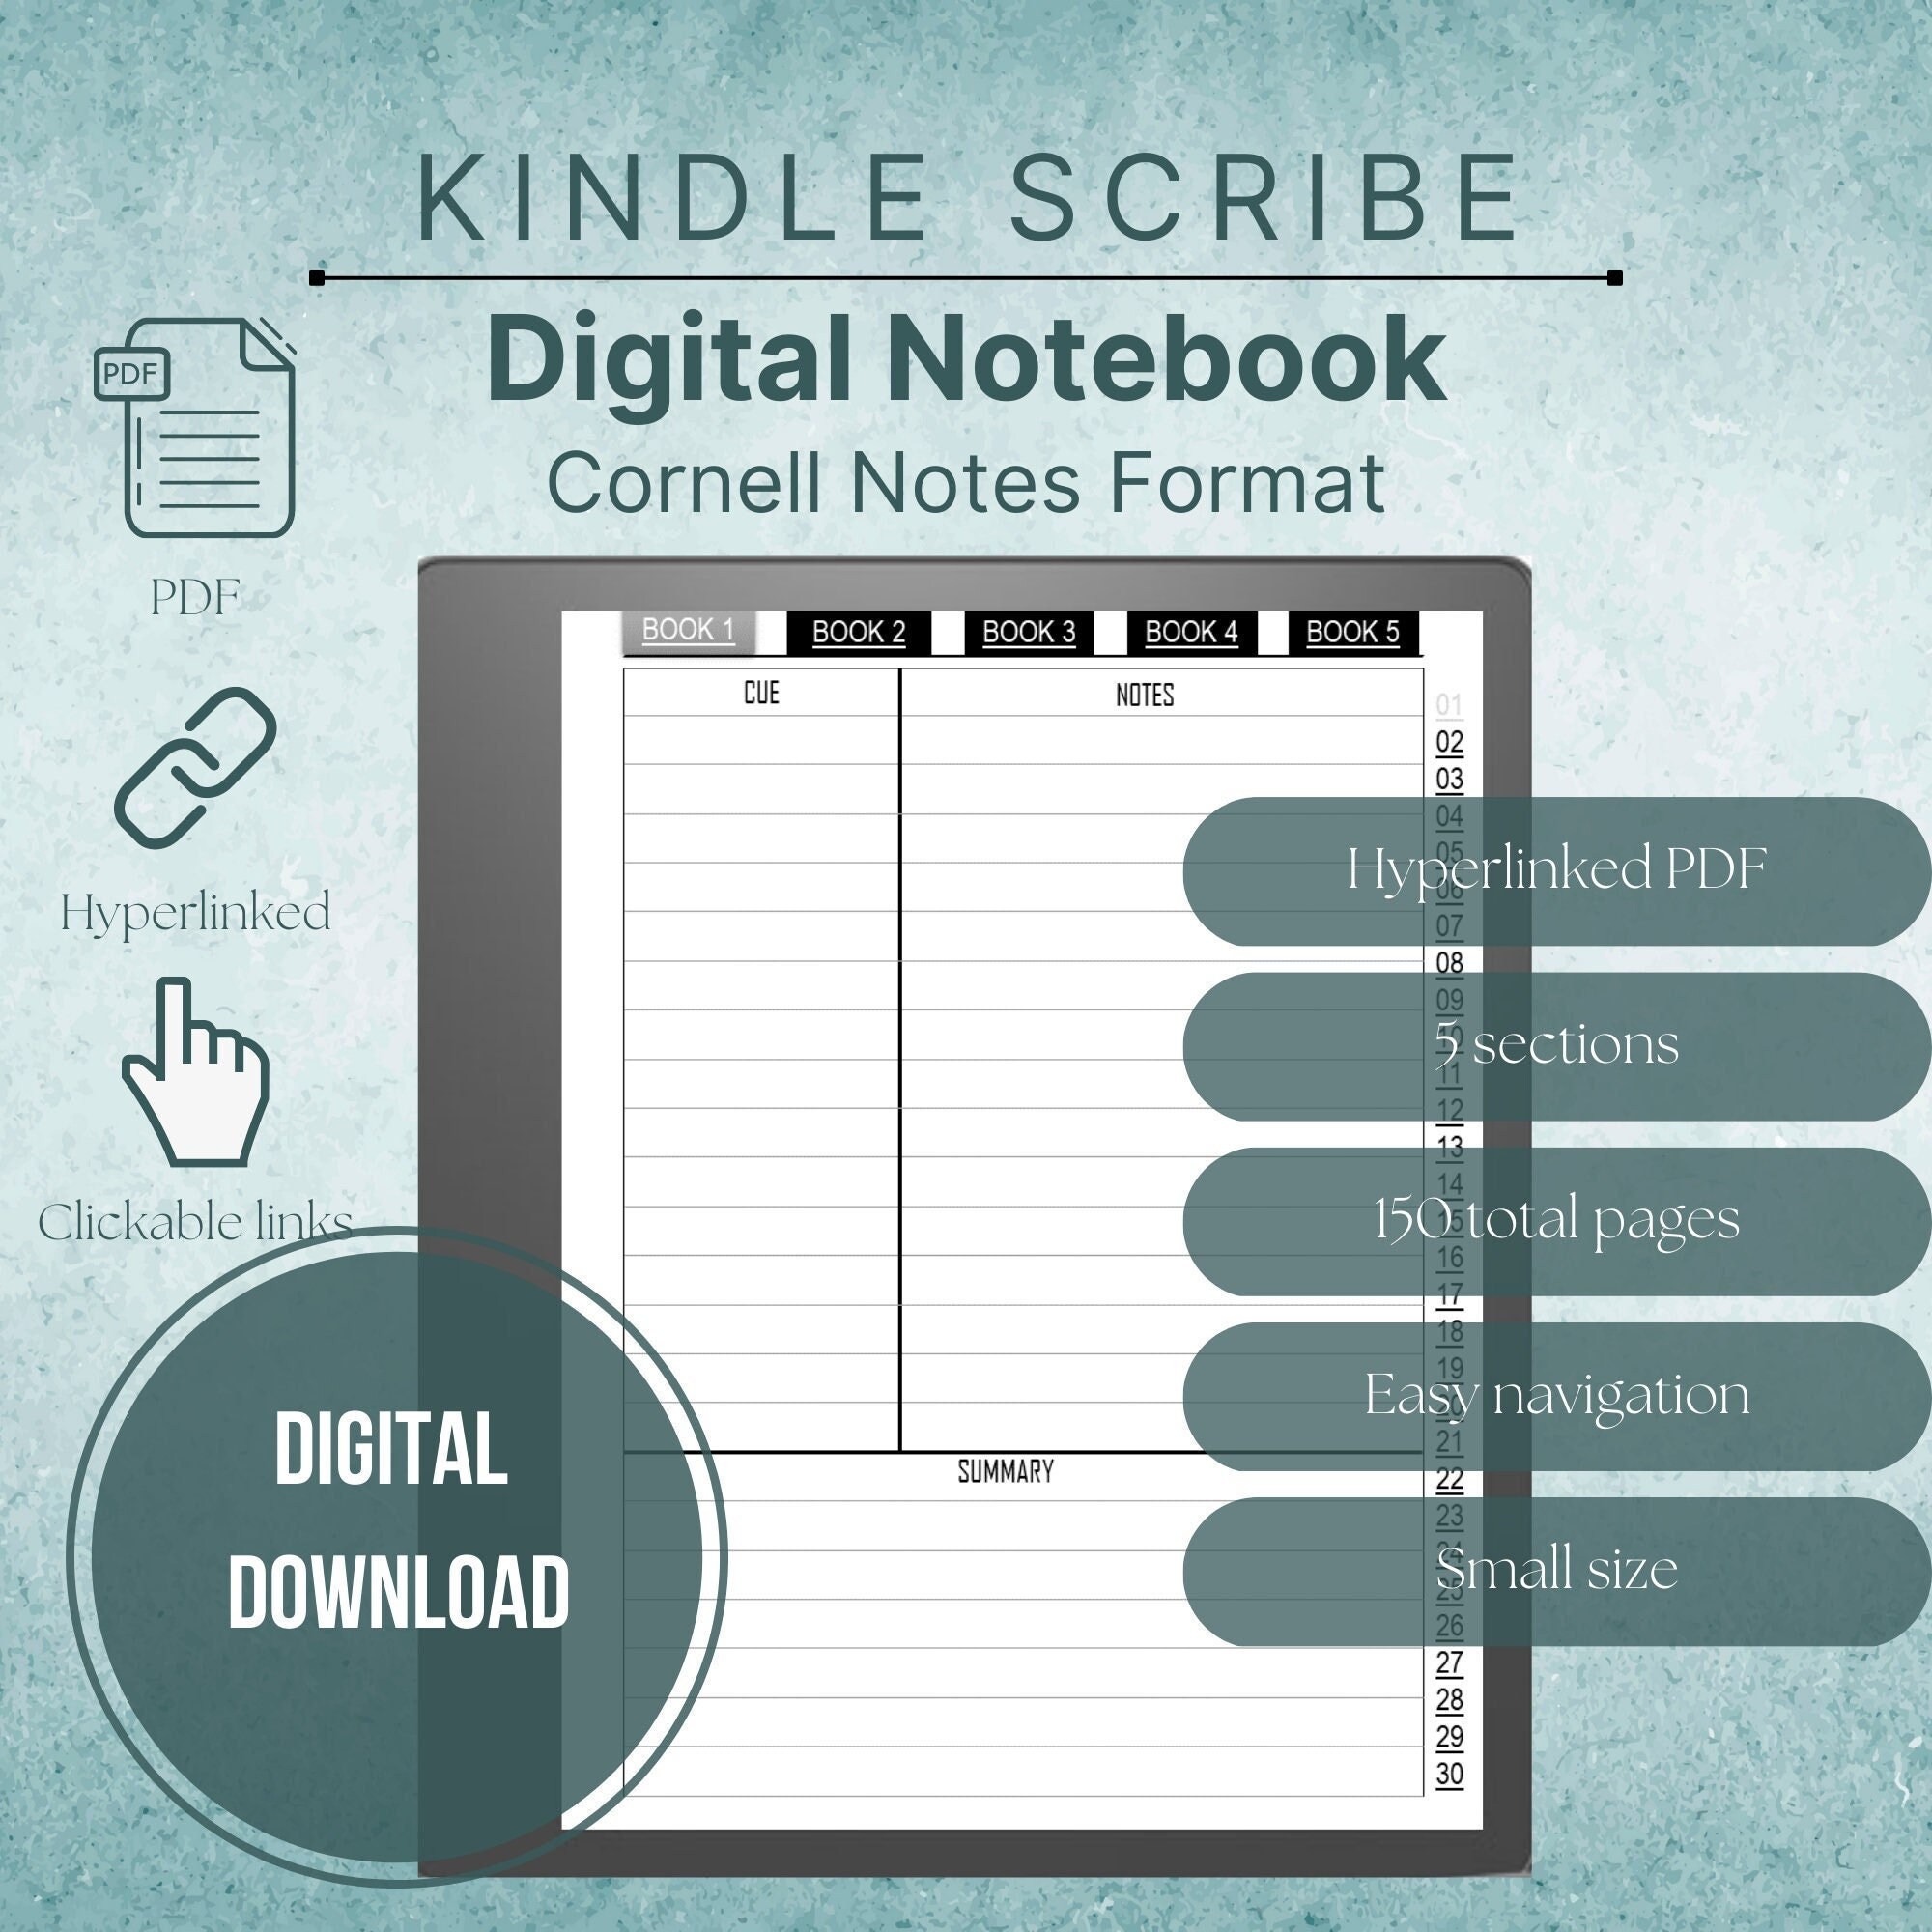 Kindle Scribe tips: 9 ways to get the most out of 's digital notebook